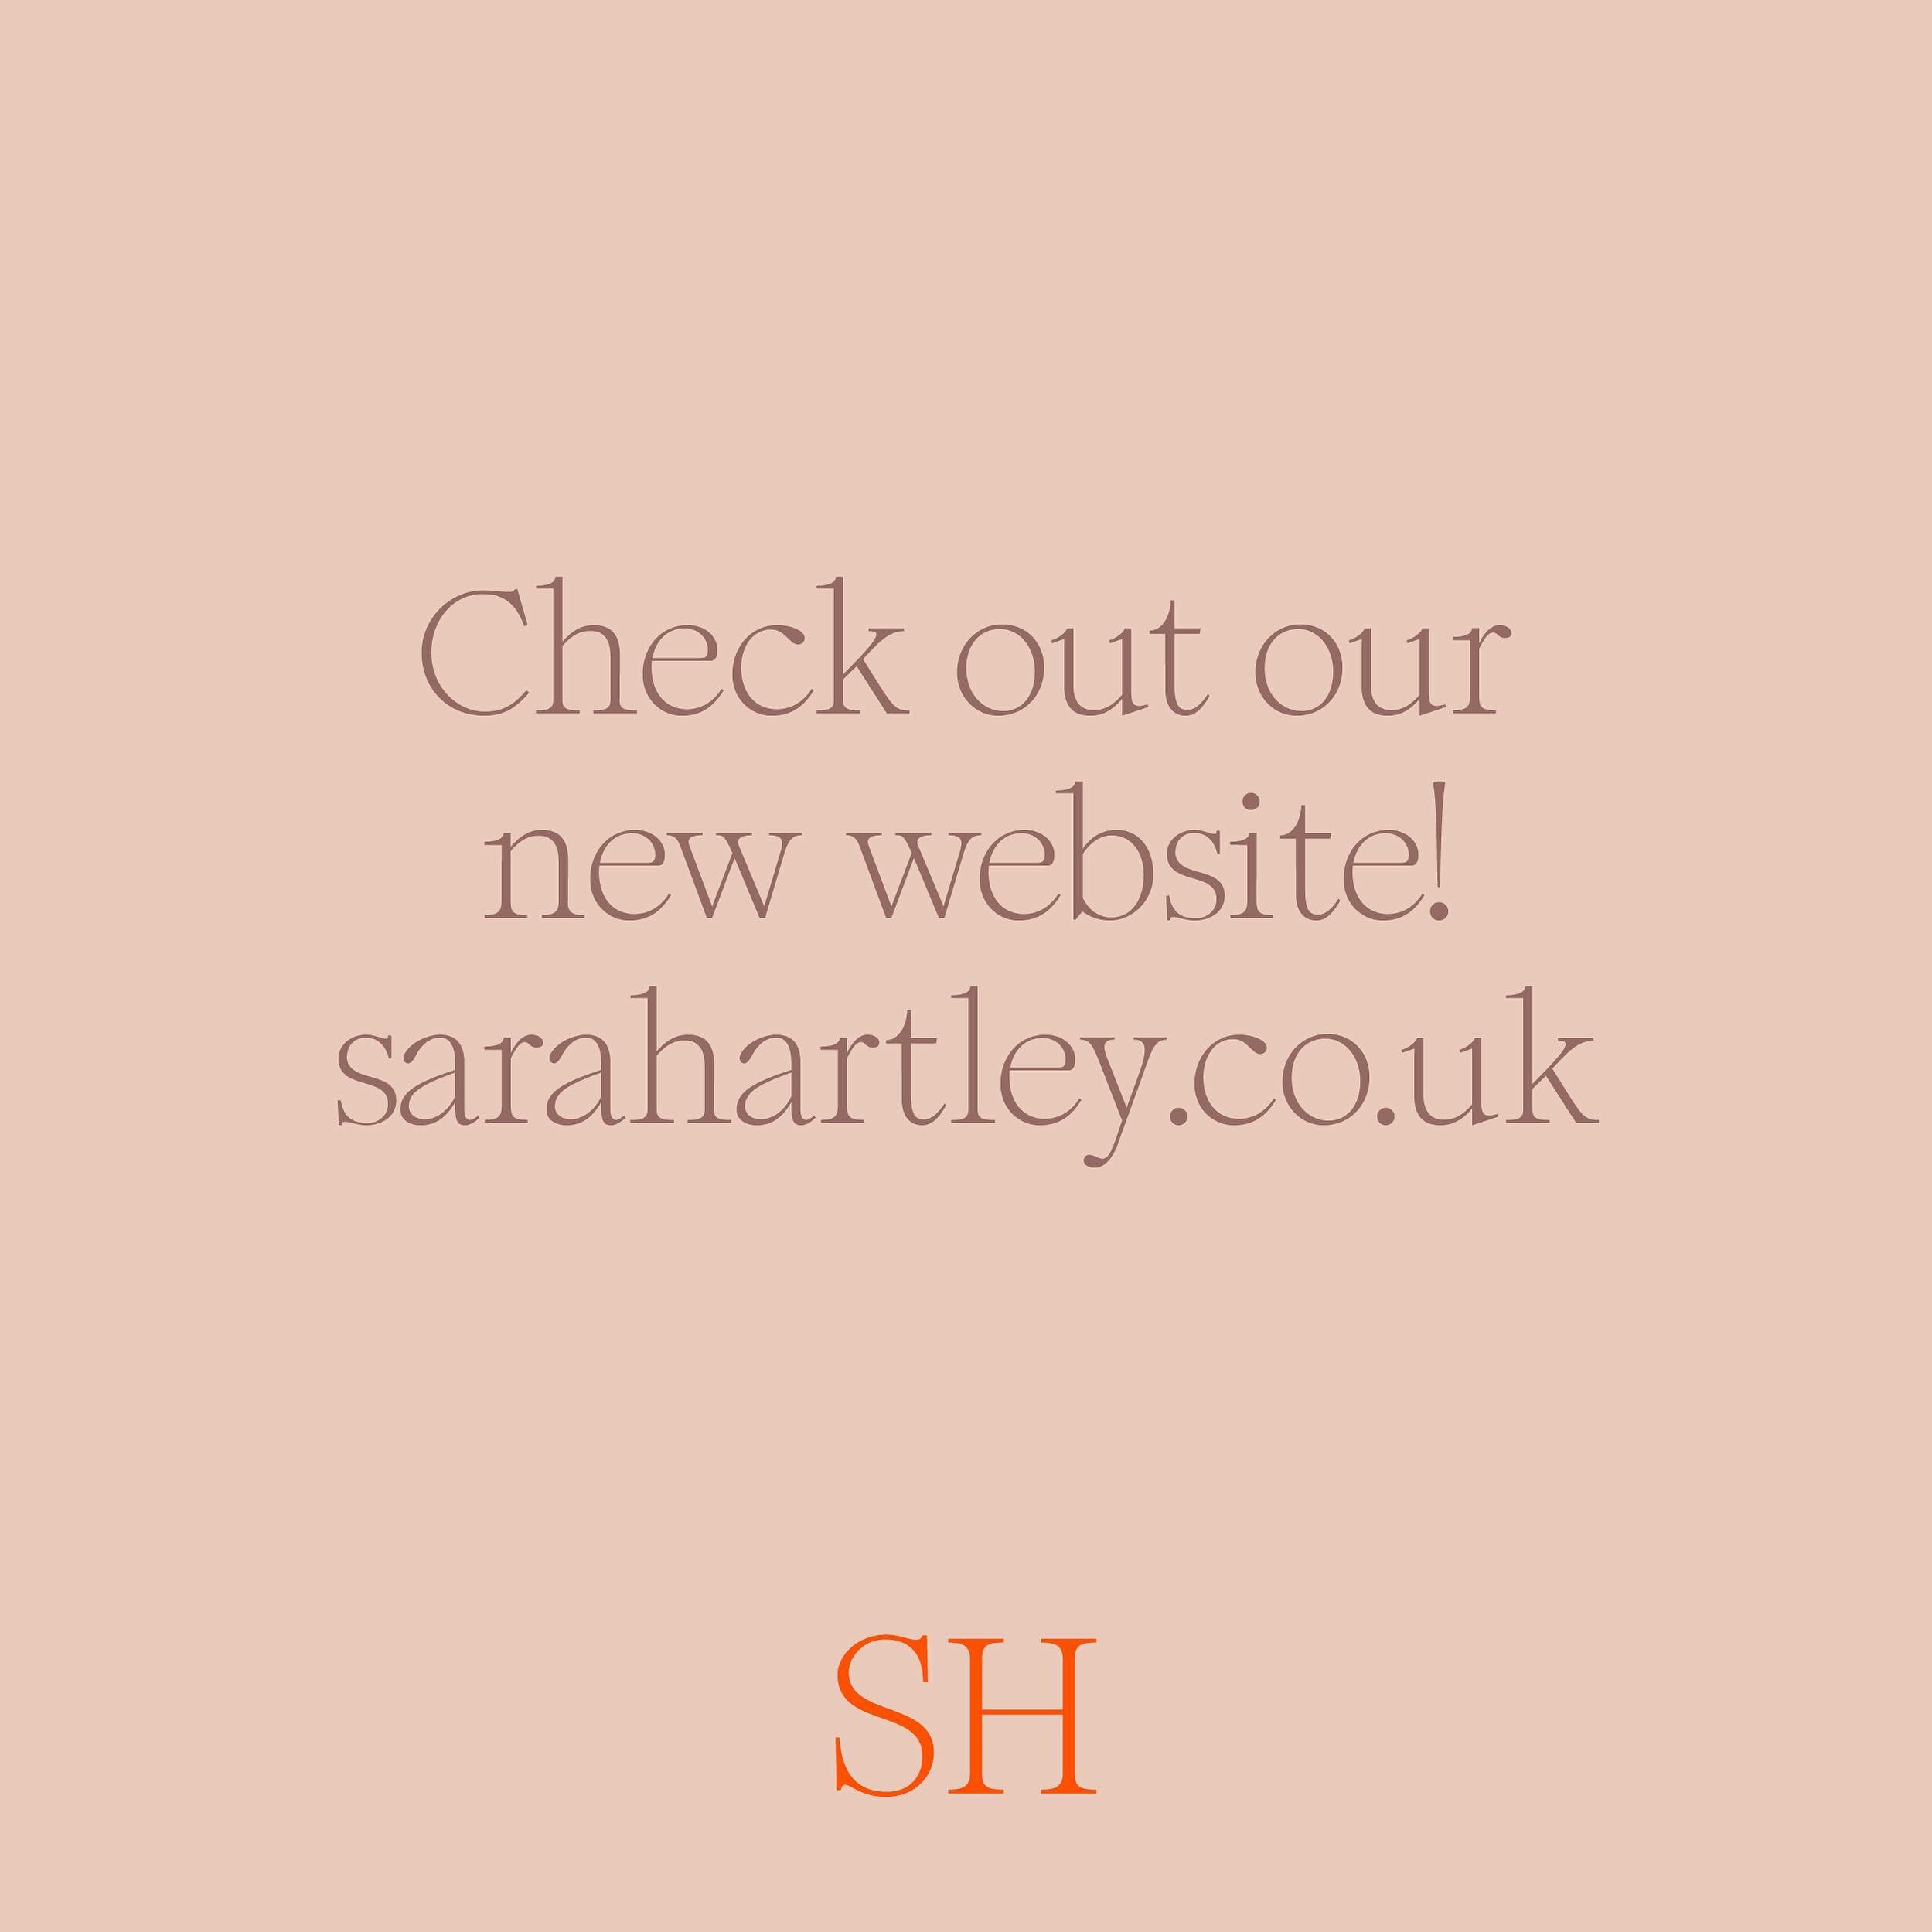 Our new website has gone live also. Check it out sarahartley.co.uk #newwebsite #newwebsitelaunch #websitelaunch